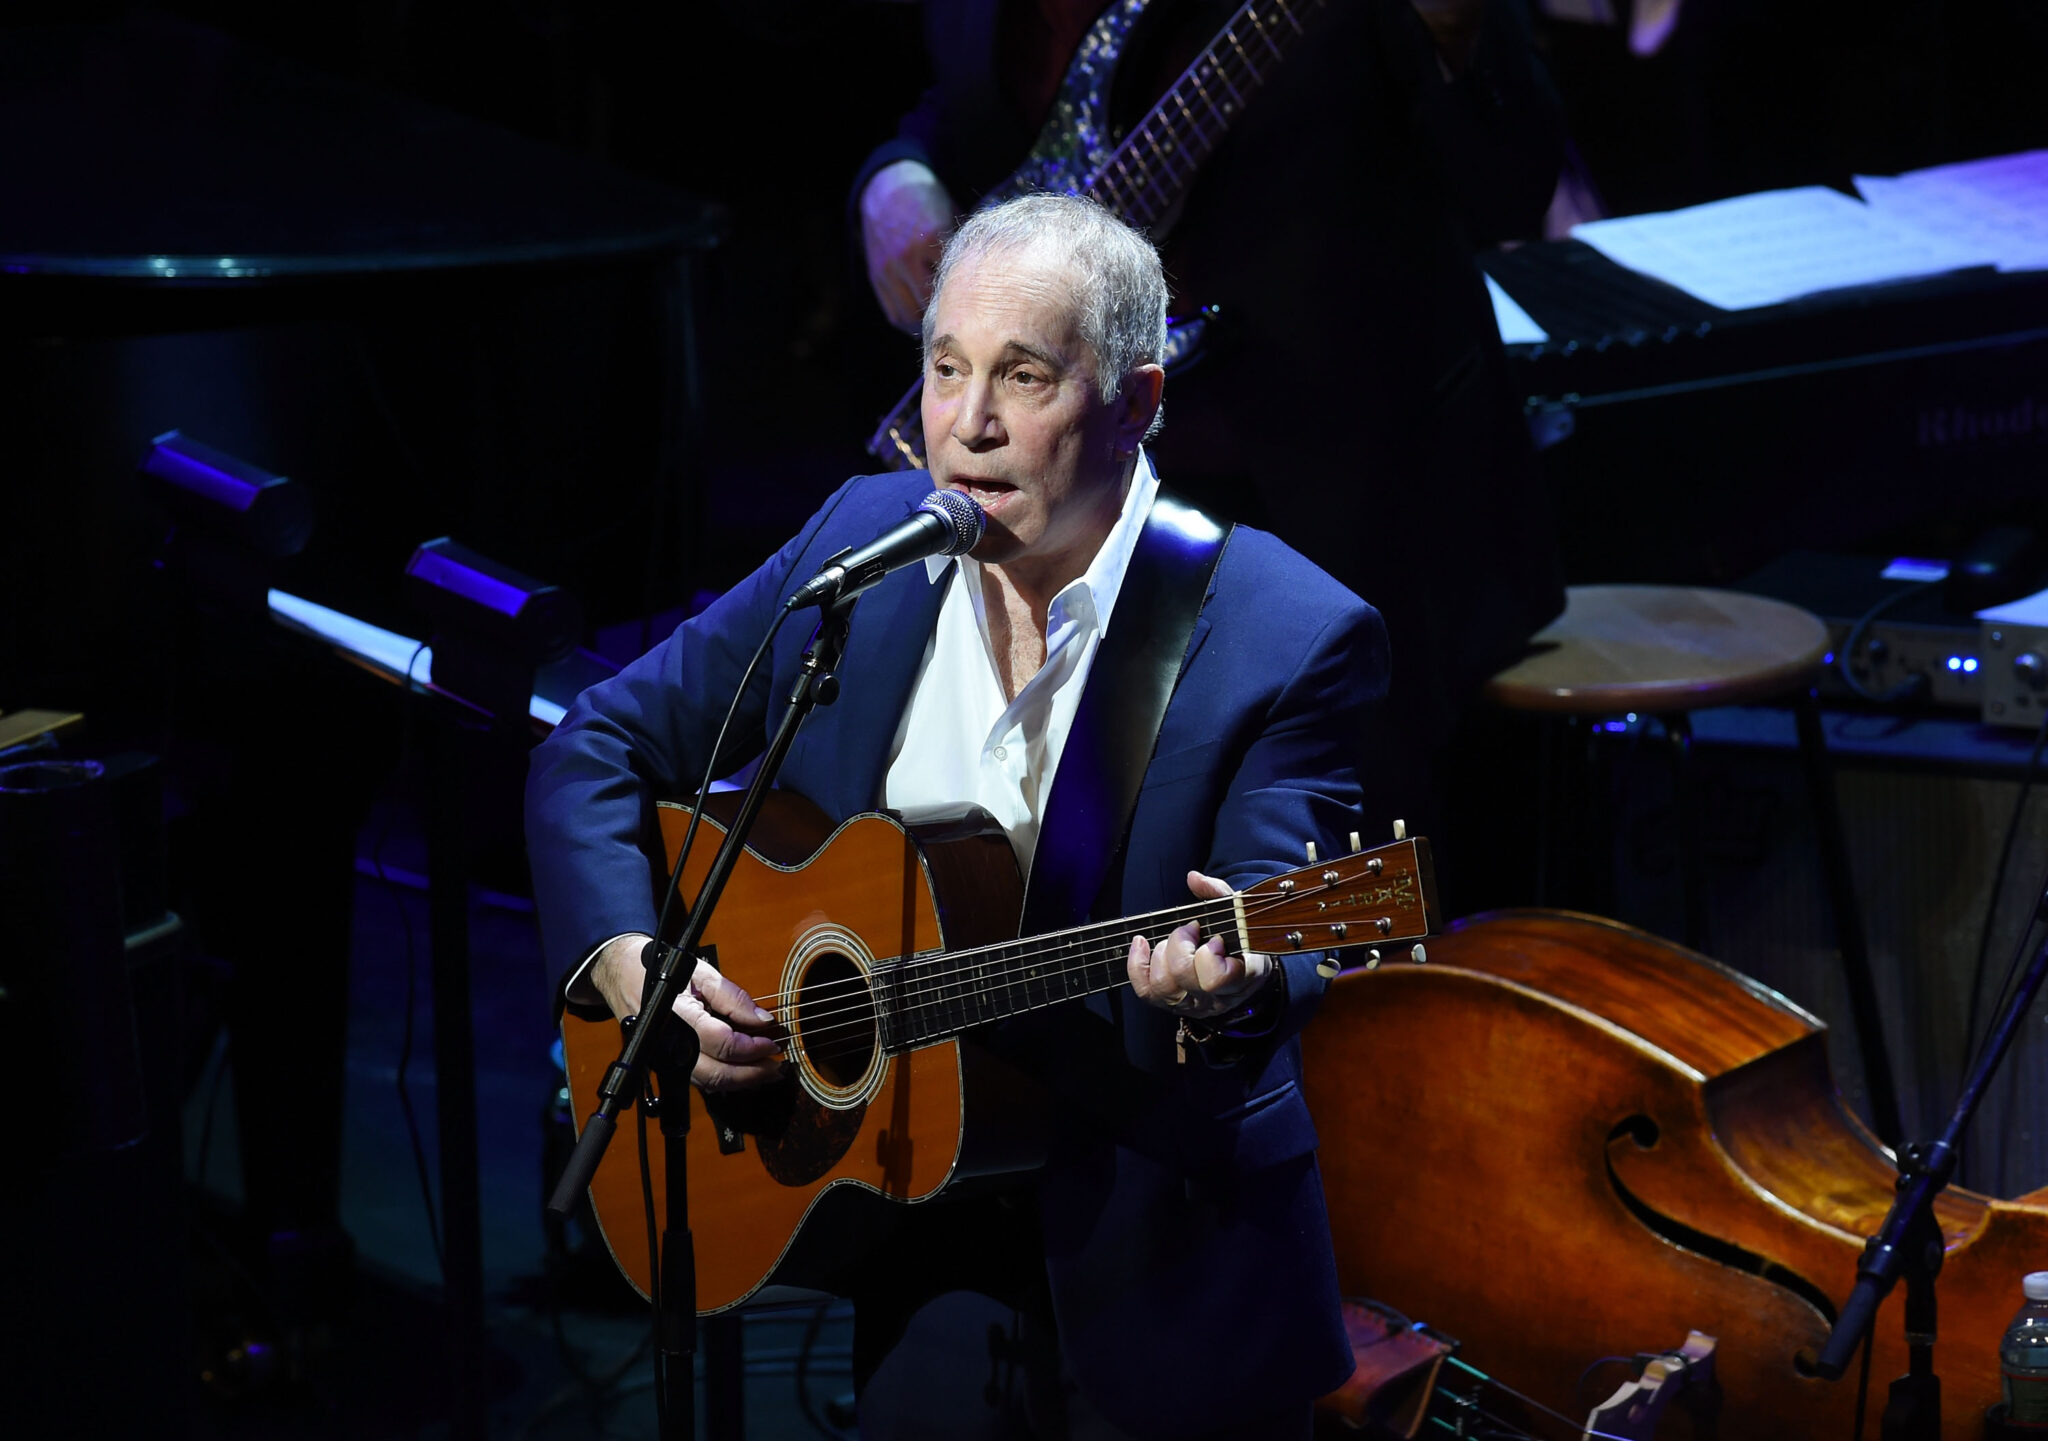 Paul Simon Says His Generation’s 'Time Is Up' As He Talks About His